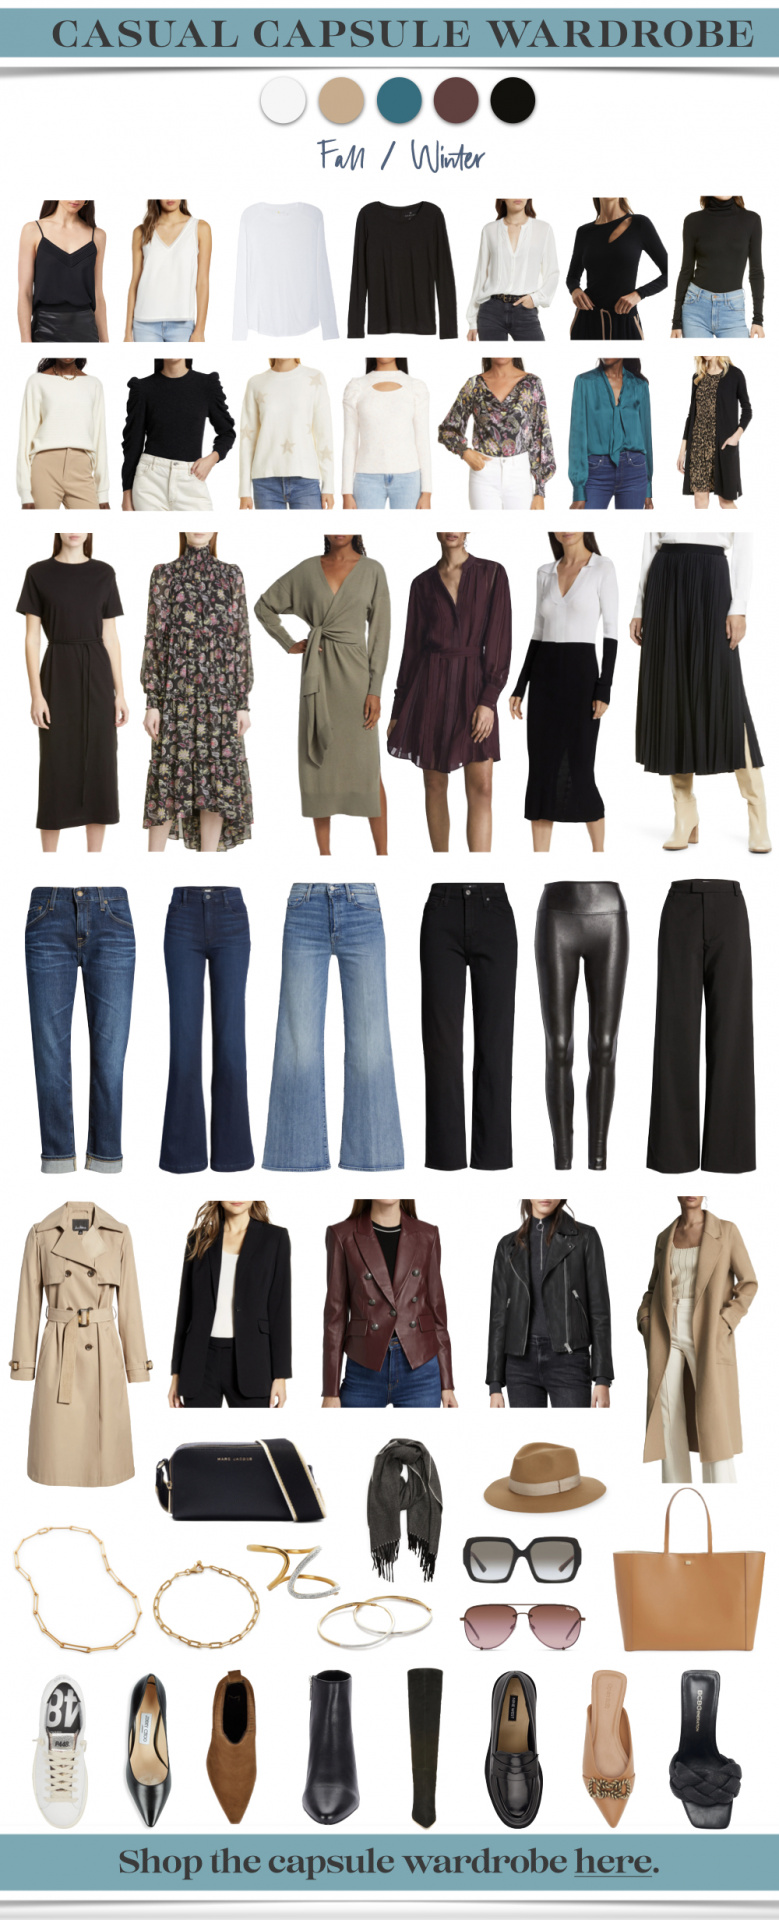 capsule wardrobe, fall wardrobe basics, winter wardrobe basics, must have wardrobe basics, erin busbee, what to buy for fall, fall outfits, winter outfits, wardrobe basics, fall capsule wardrobe